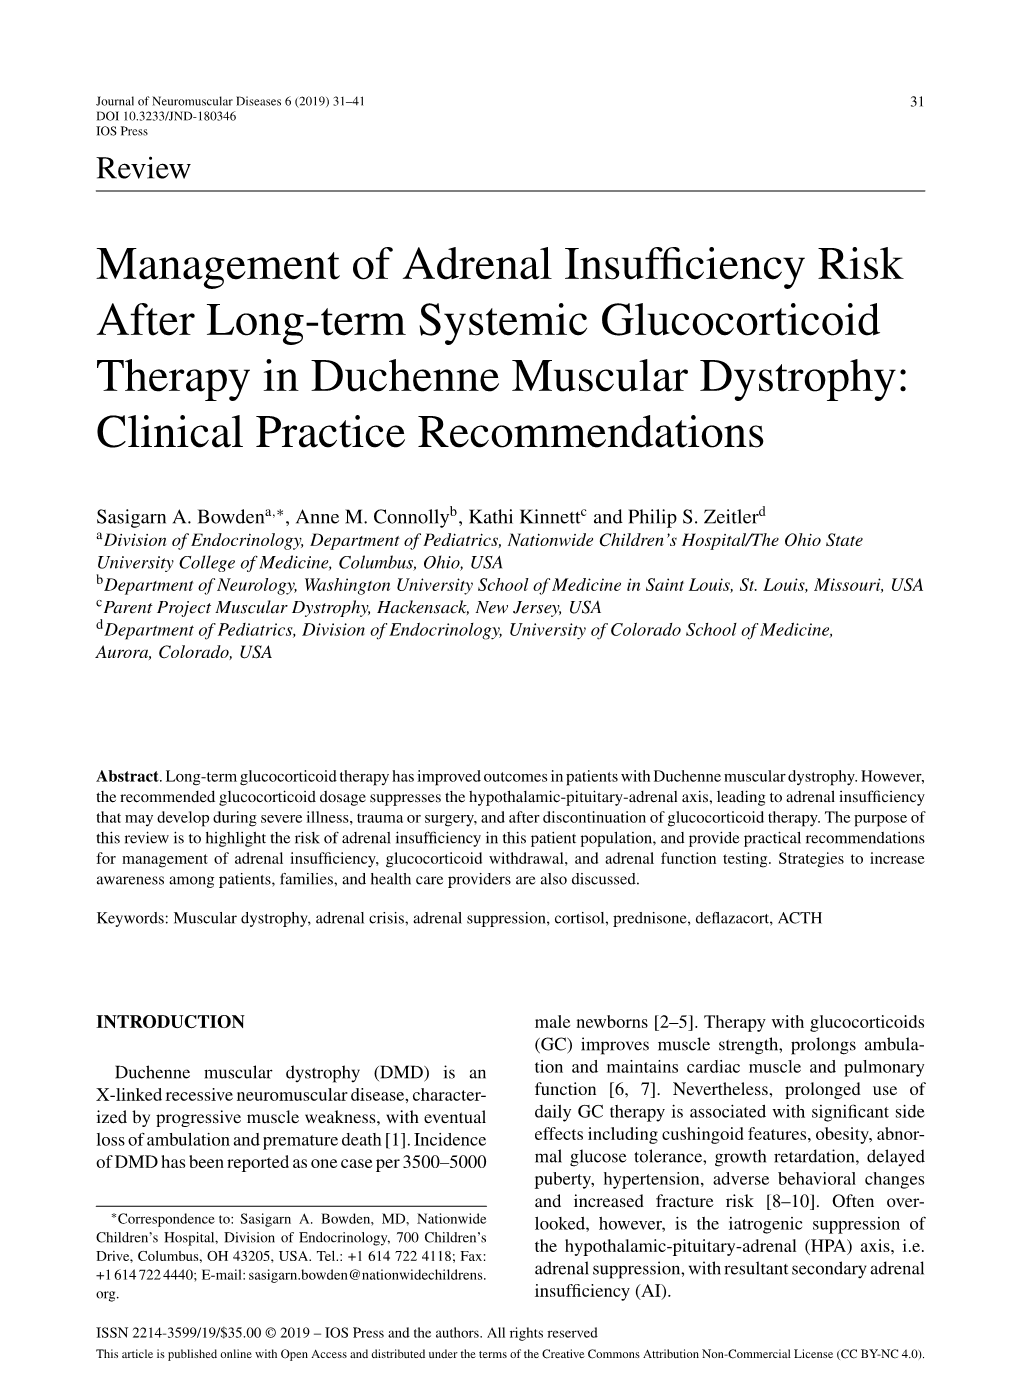 Management of Adrenal Insufficiency Risk After Long-Term Systemic